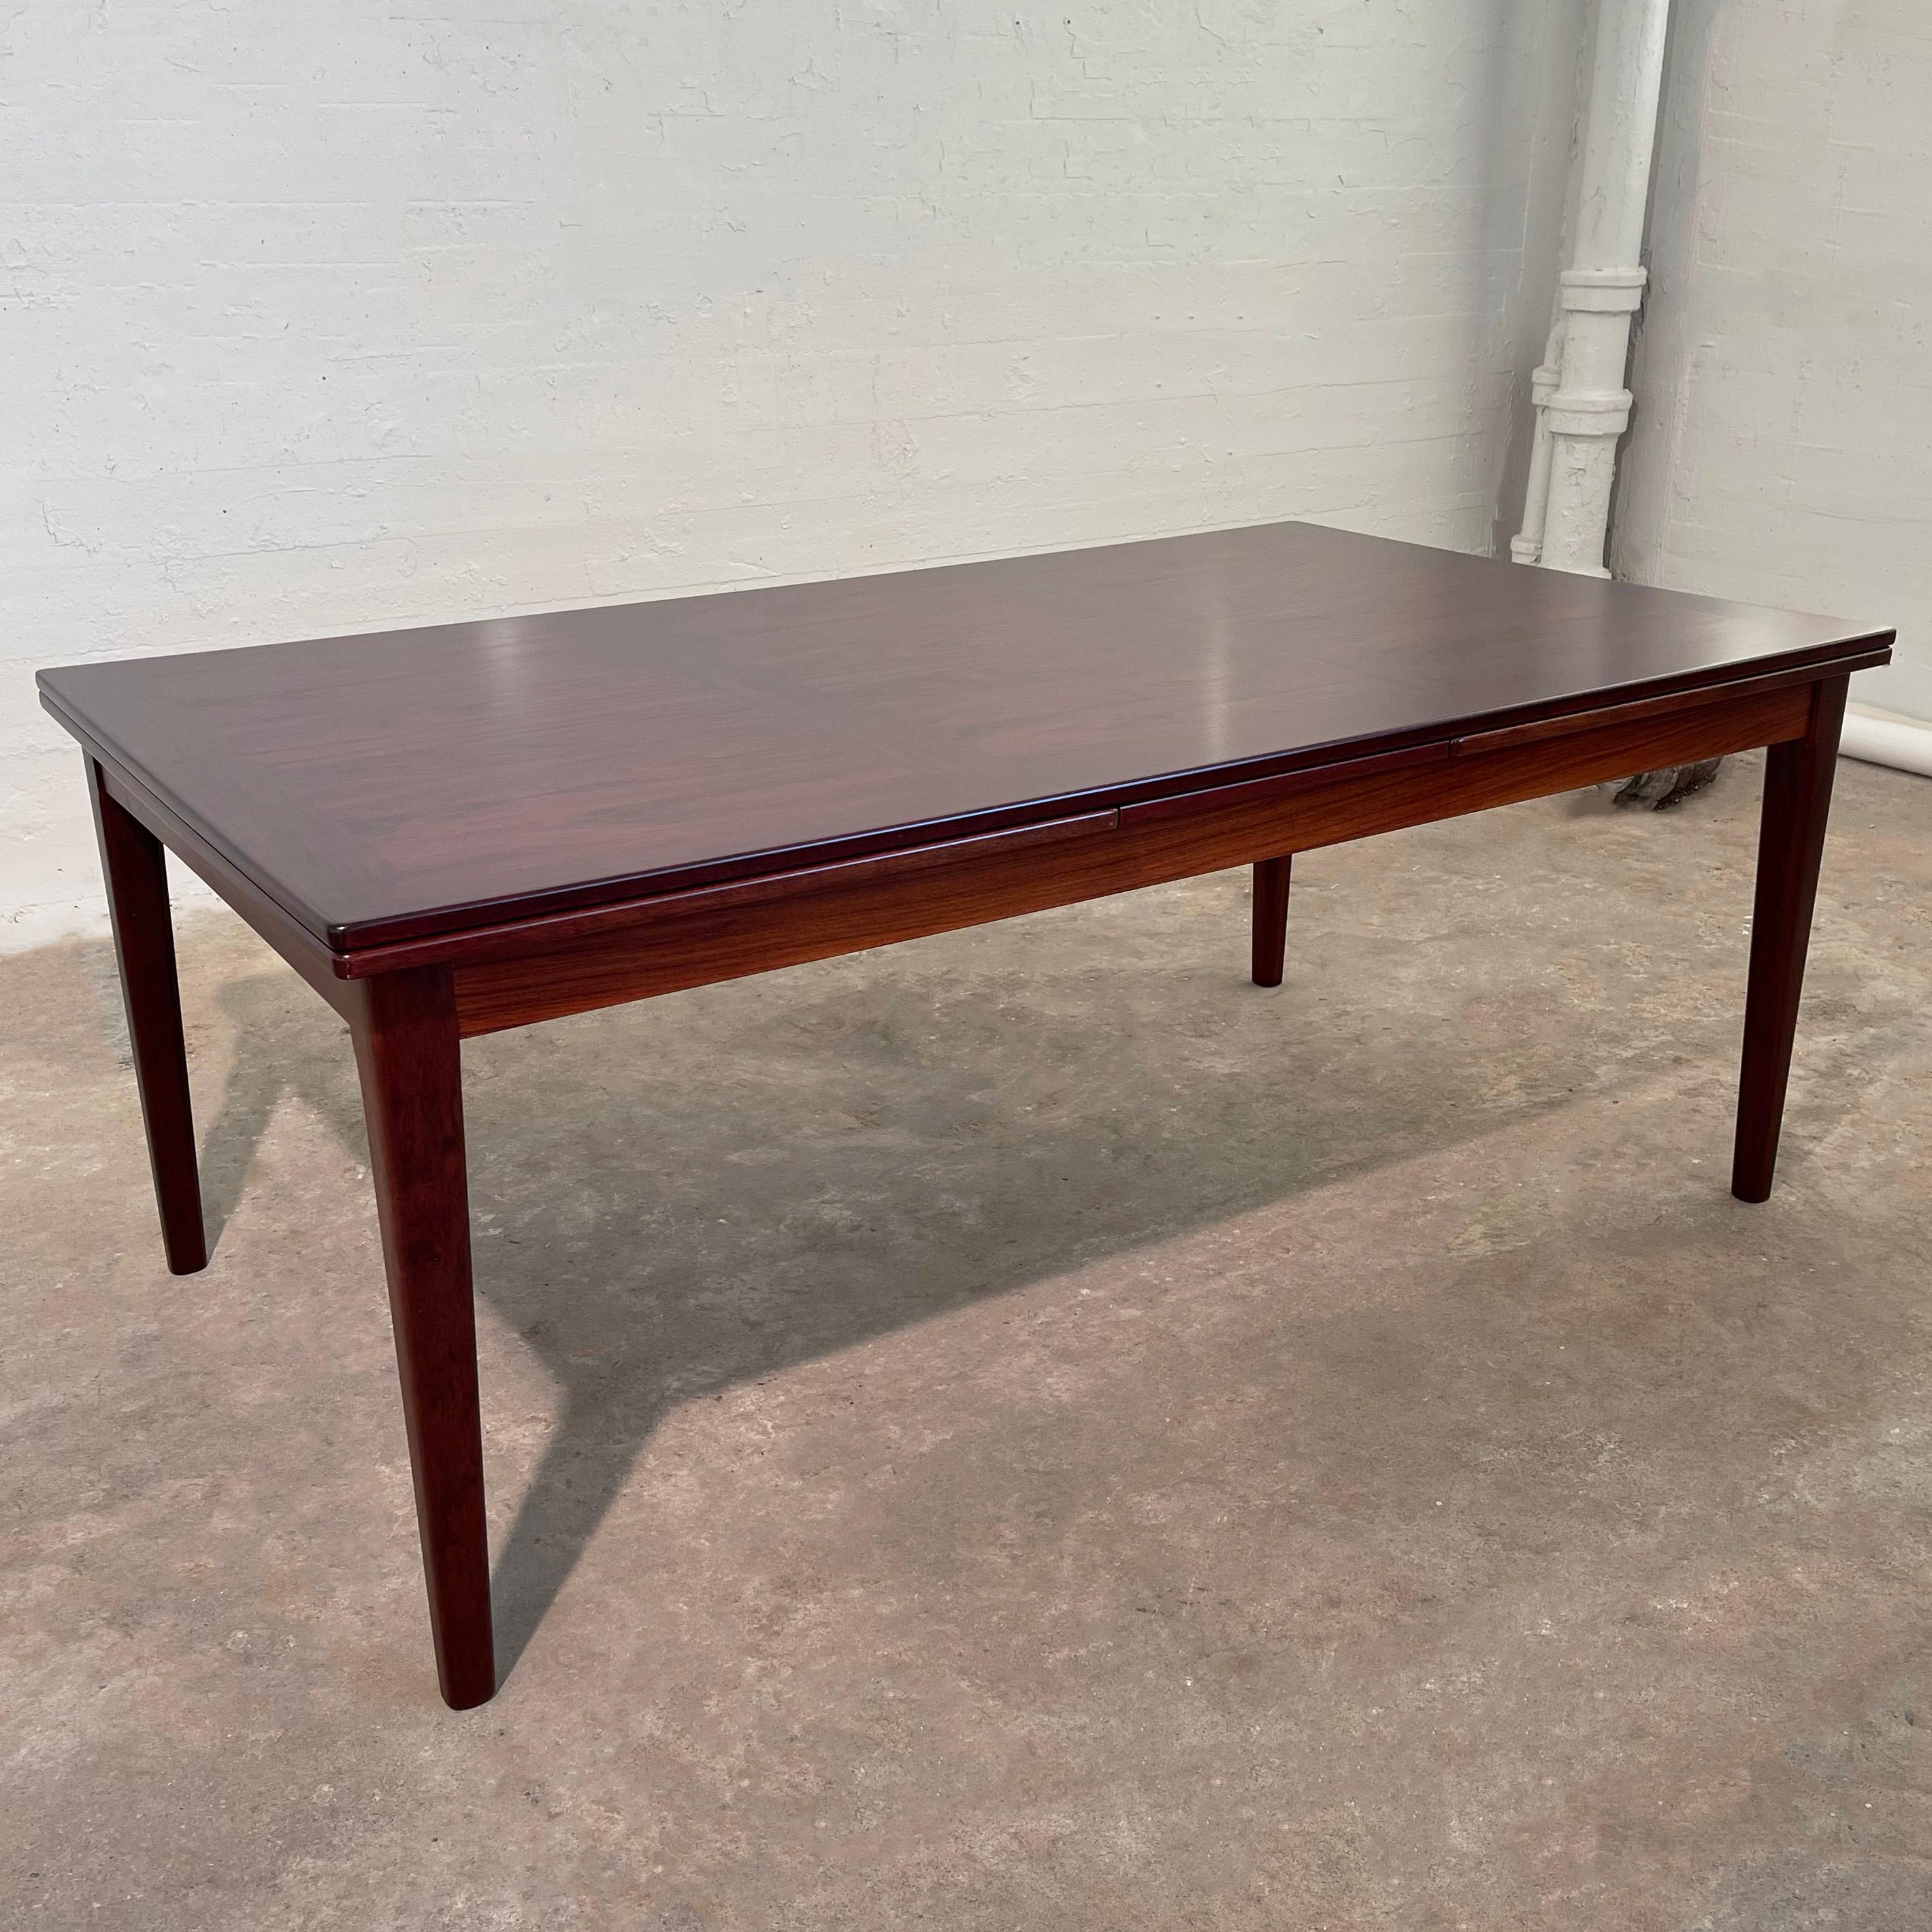 Danish Scandinavian Modern Rosewood Extension Dining Table By Scovby Mobelfabrik For Sale